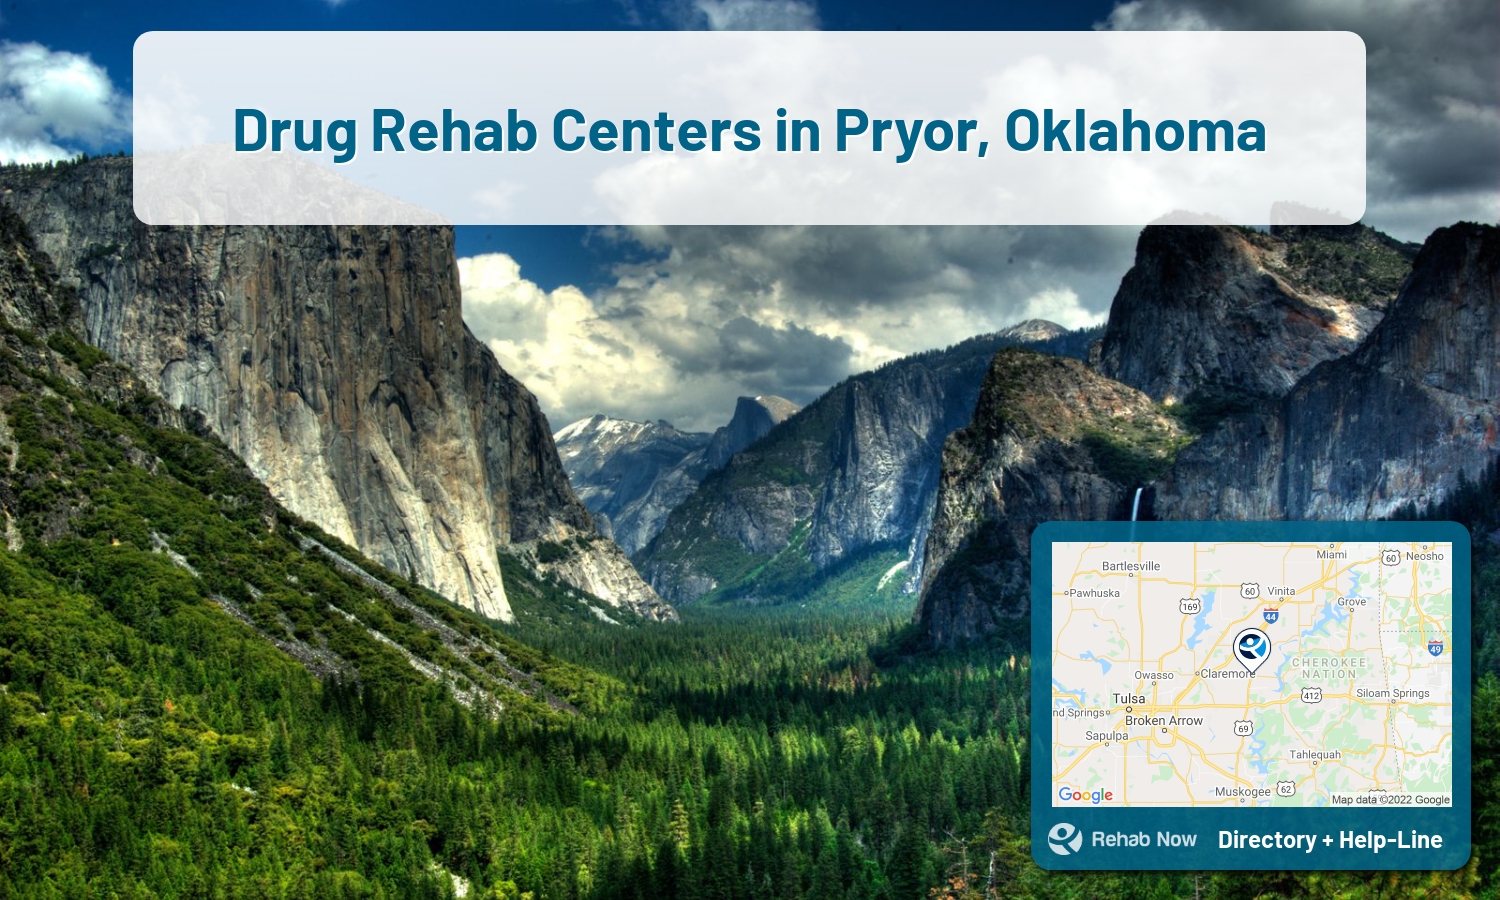 Find drug rehab and alcohol treatment services in Pryor. Our experts help you find a center in Pryor, Oklahoma